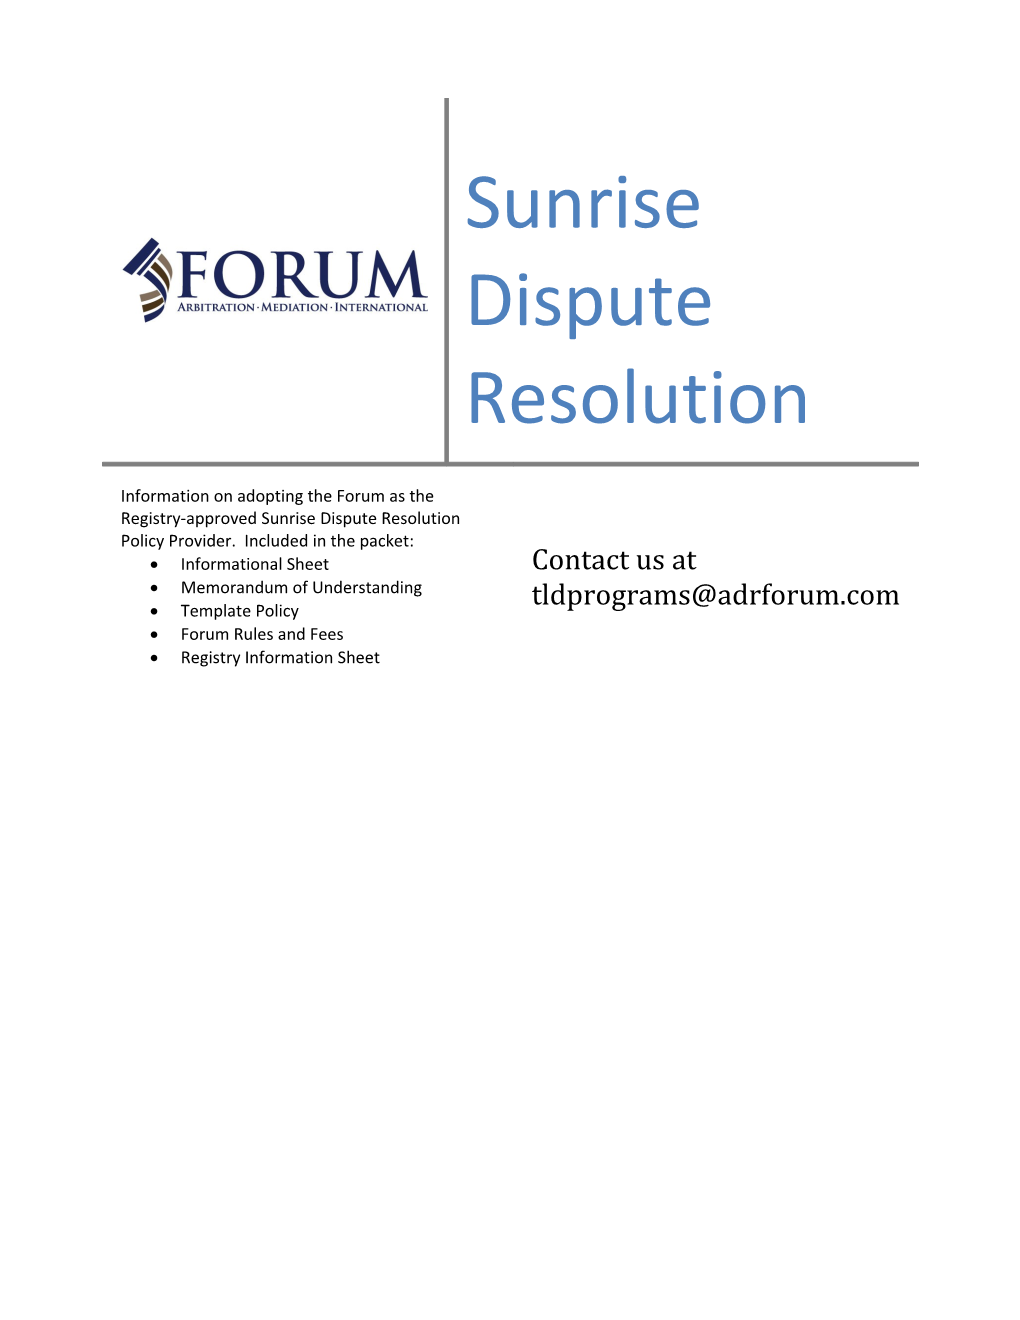 Registry Operator Information for Forum S Sunrise Dispute Resolution Policy